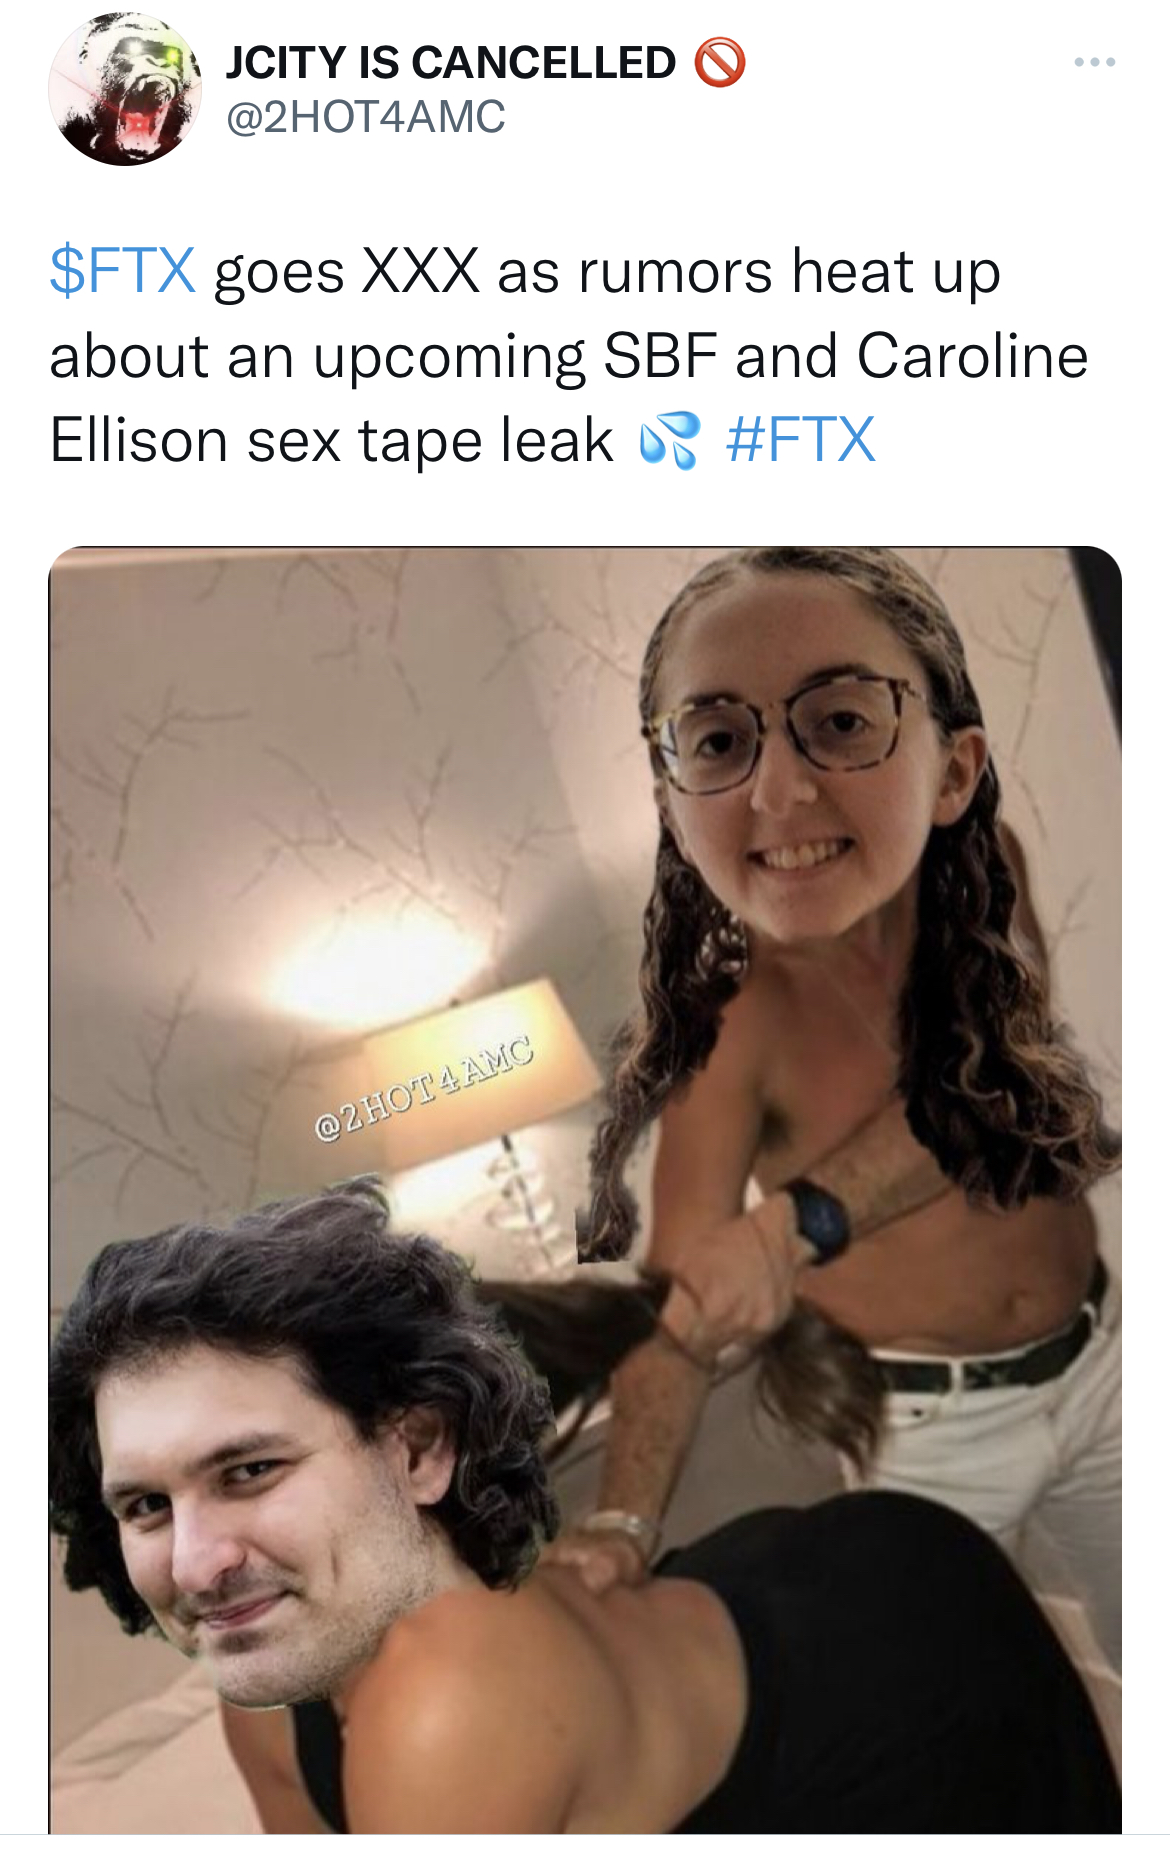 tweets roasting celebs - glasses - Jcity Is Cancelled $Ftx goes Xxx as rumors heat up about an upcoming Sbf and Caroline Ellison sex tape leak